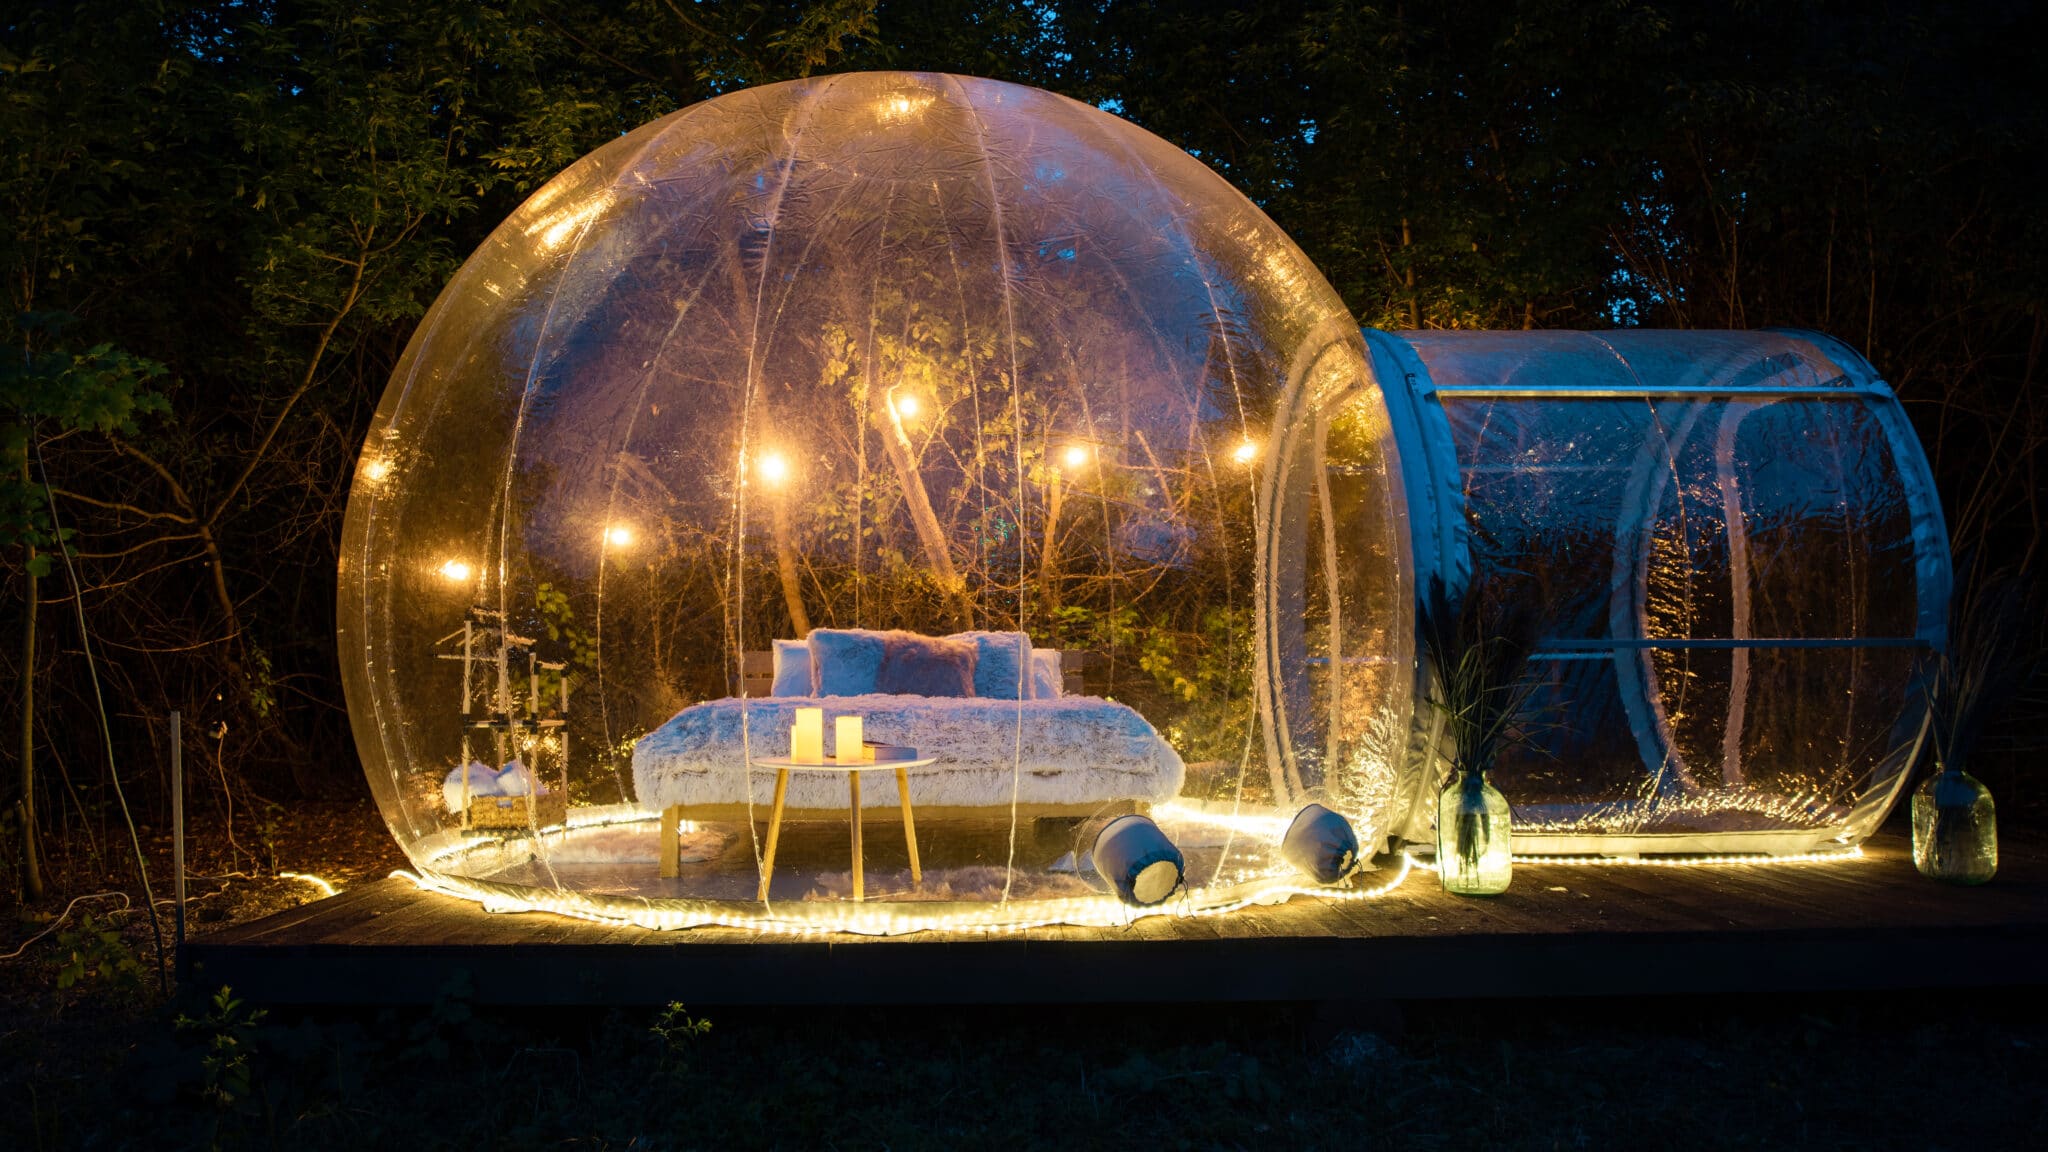 Transparent bubble tent at glamping at night